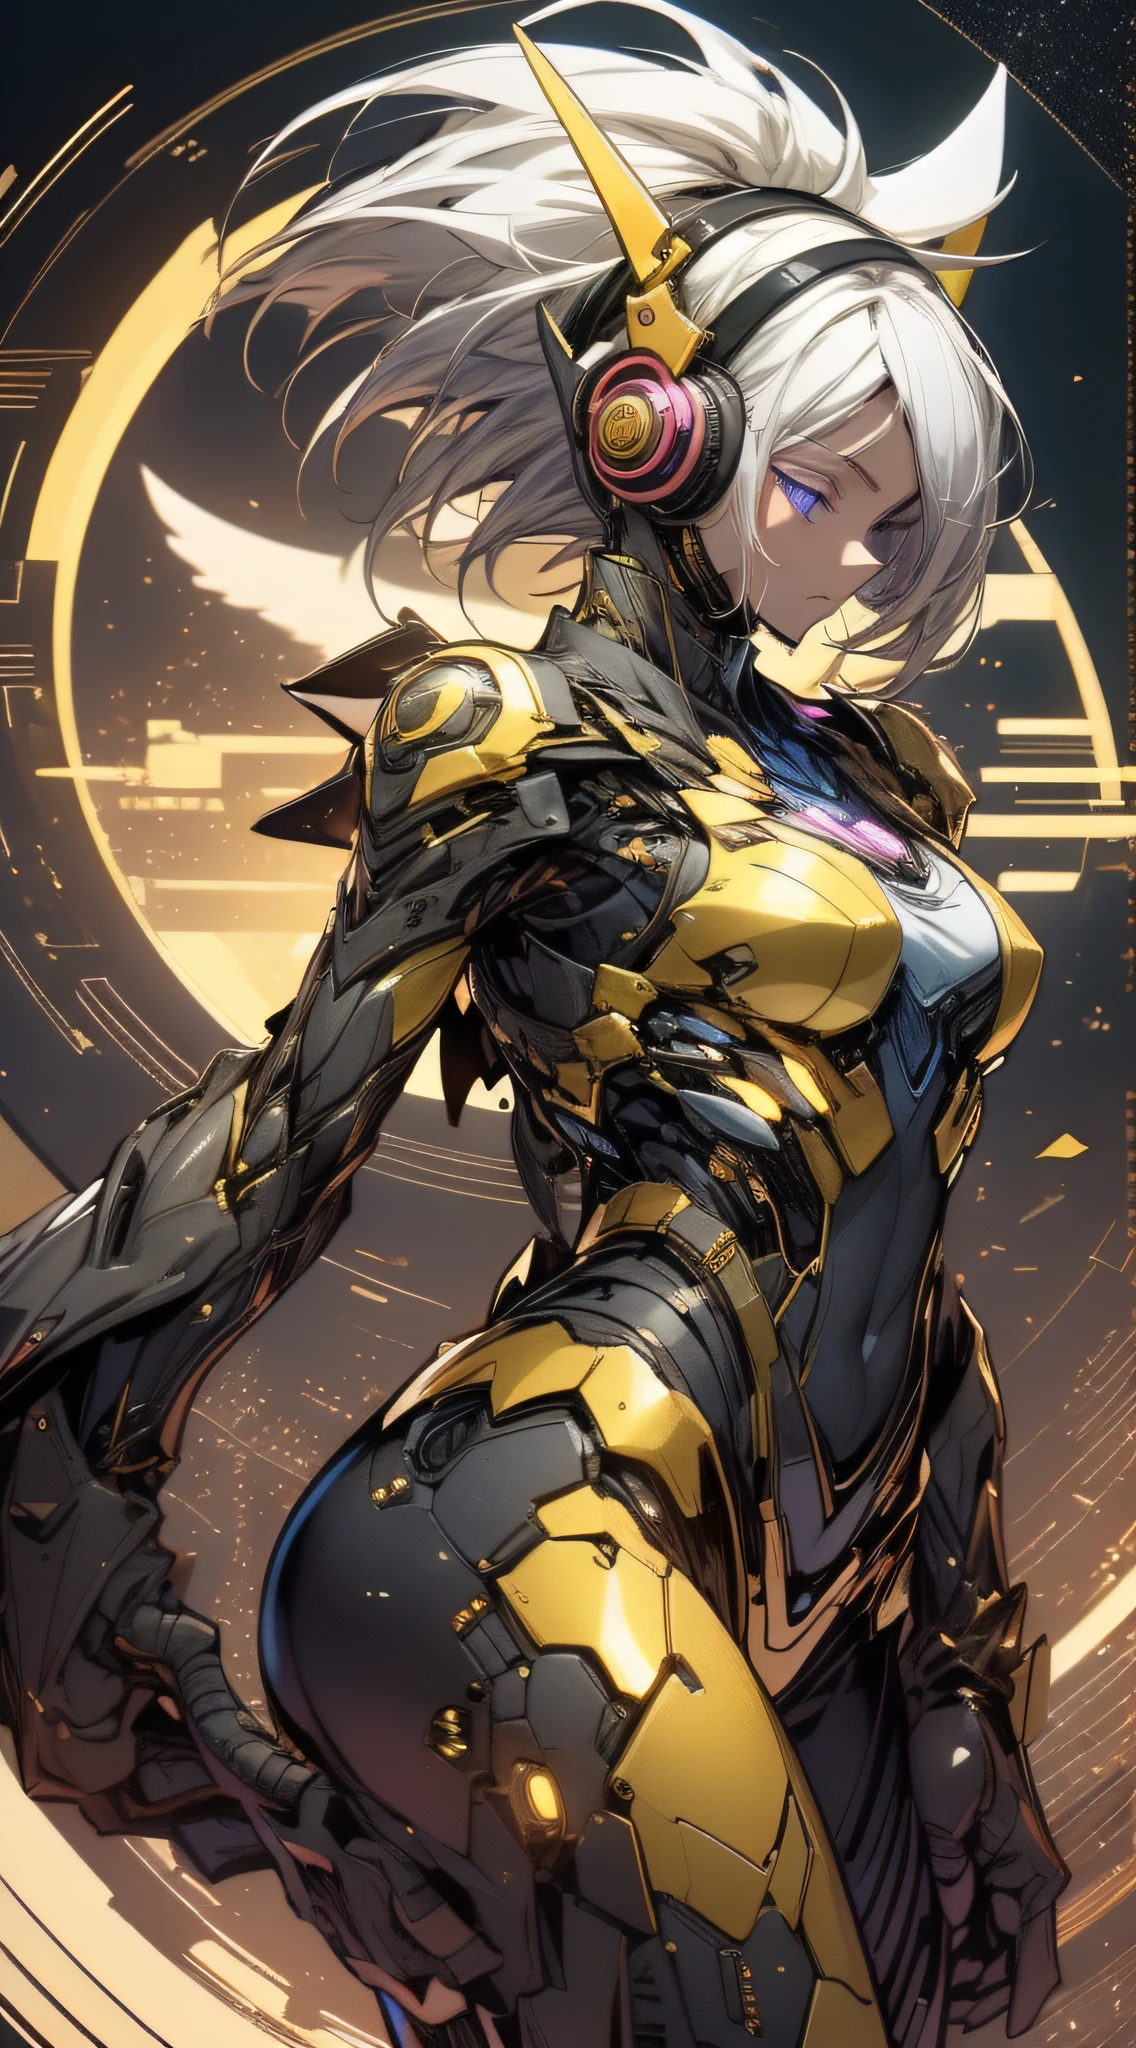 top-quality、Top image quality、​masterpiece、girl with((black mecha suit、Shining gold mech suit、18year old、 Ager、cute little、Best Bust、big bast,Beautifully shining purple eyes open wide, Messy silver hair、Longhaire、A slender,big moves in volleyball,mechanic jet pack、headphone pose、running splatter、sucked into a black hole)),hiquality、Beautiful Art、Background with((Shining galaxy world lucky hole)))、,masutepiece、depth of fields,Cinematic style